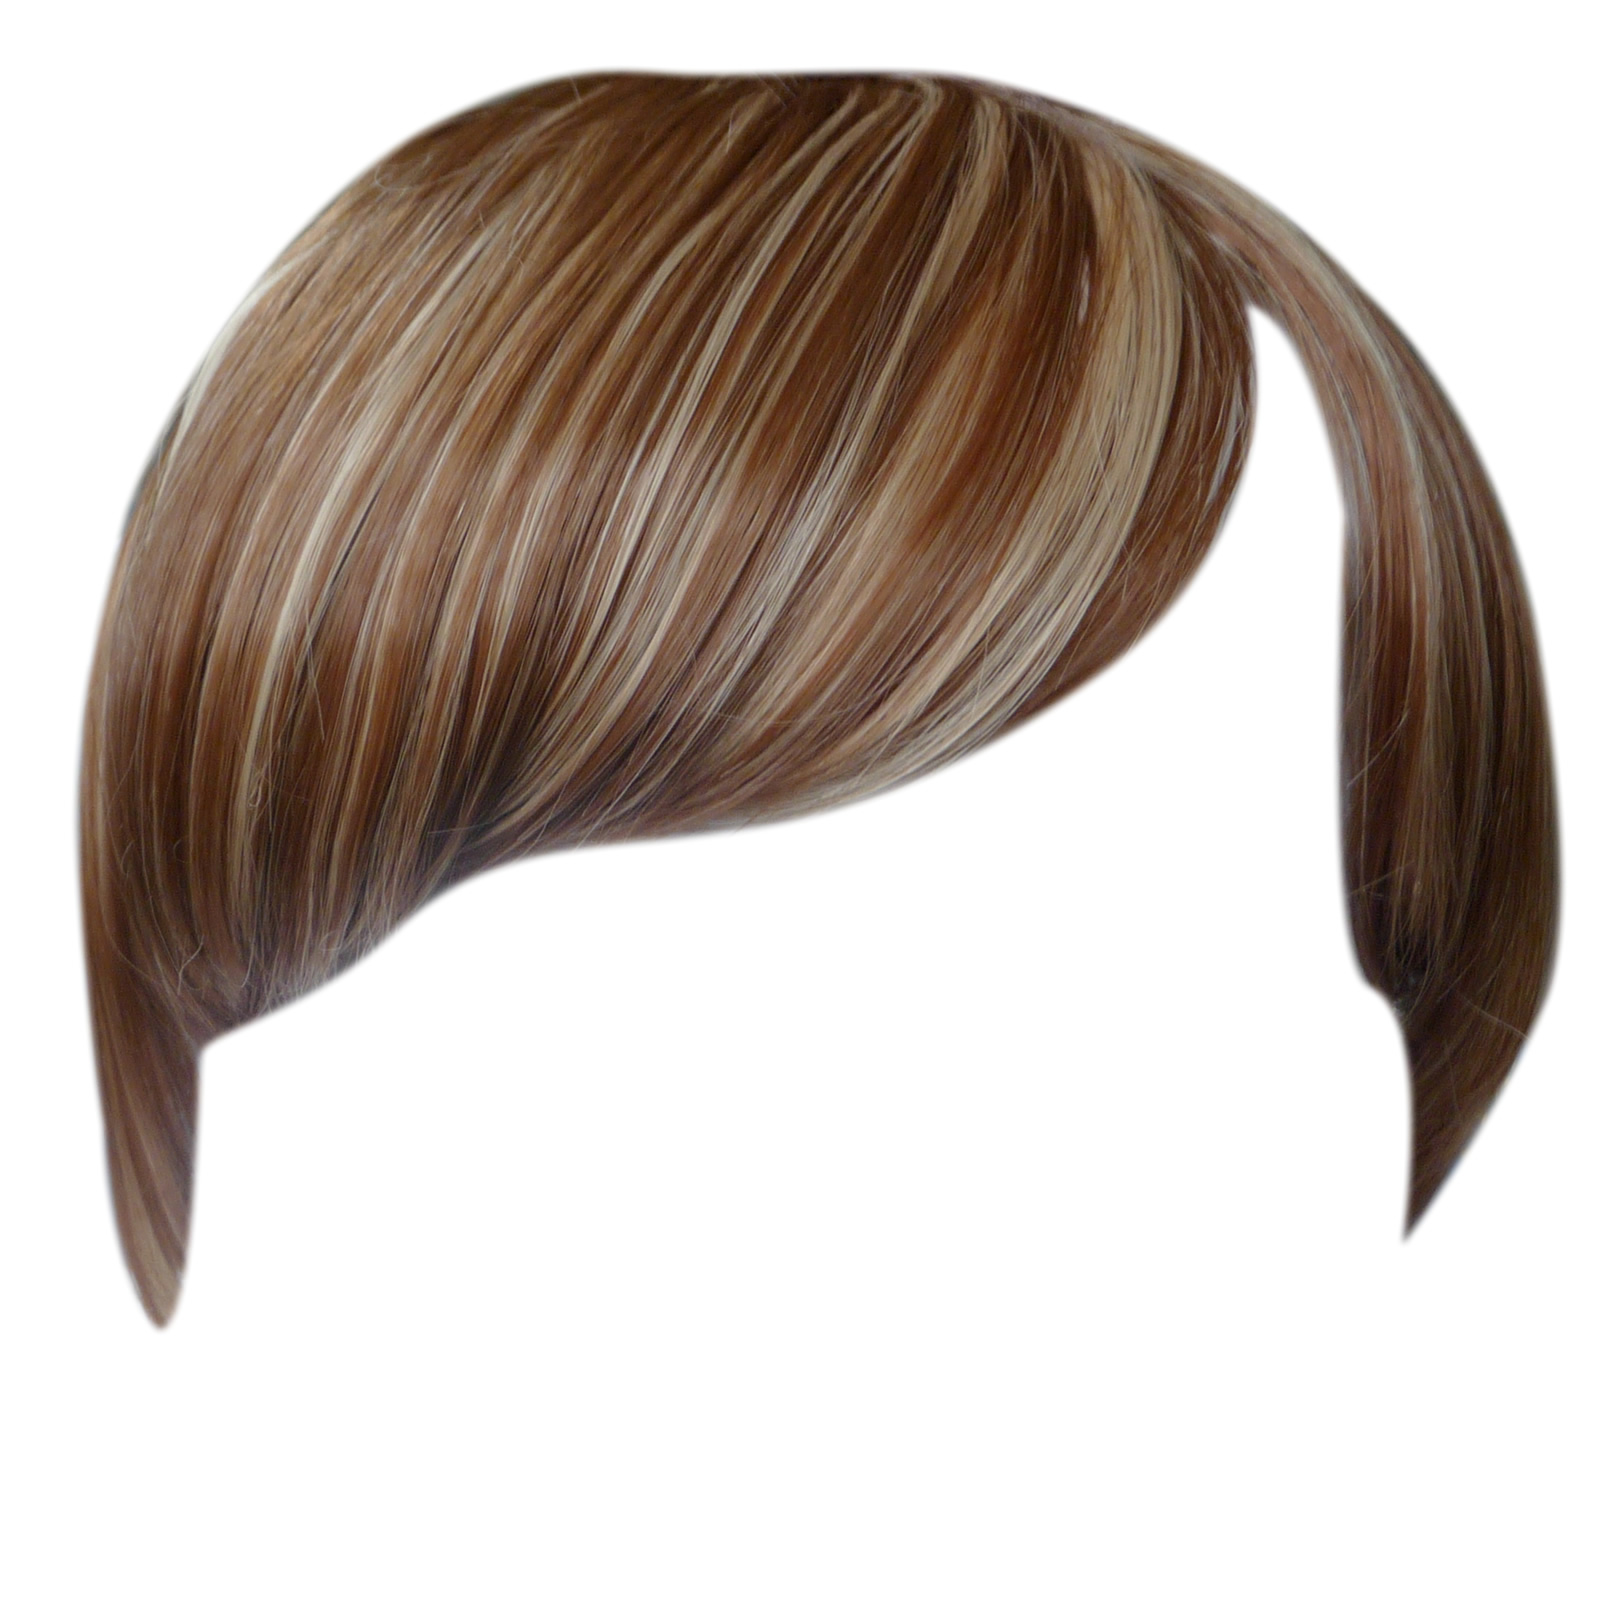 FRINGE BANGS Clip In On Hair Extensions STRAIGHT - CHOOSE ANY COLOUR ...